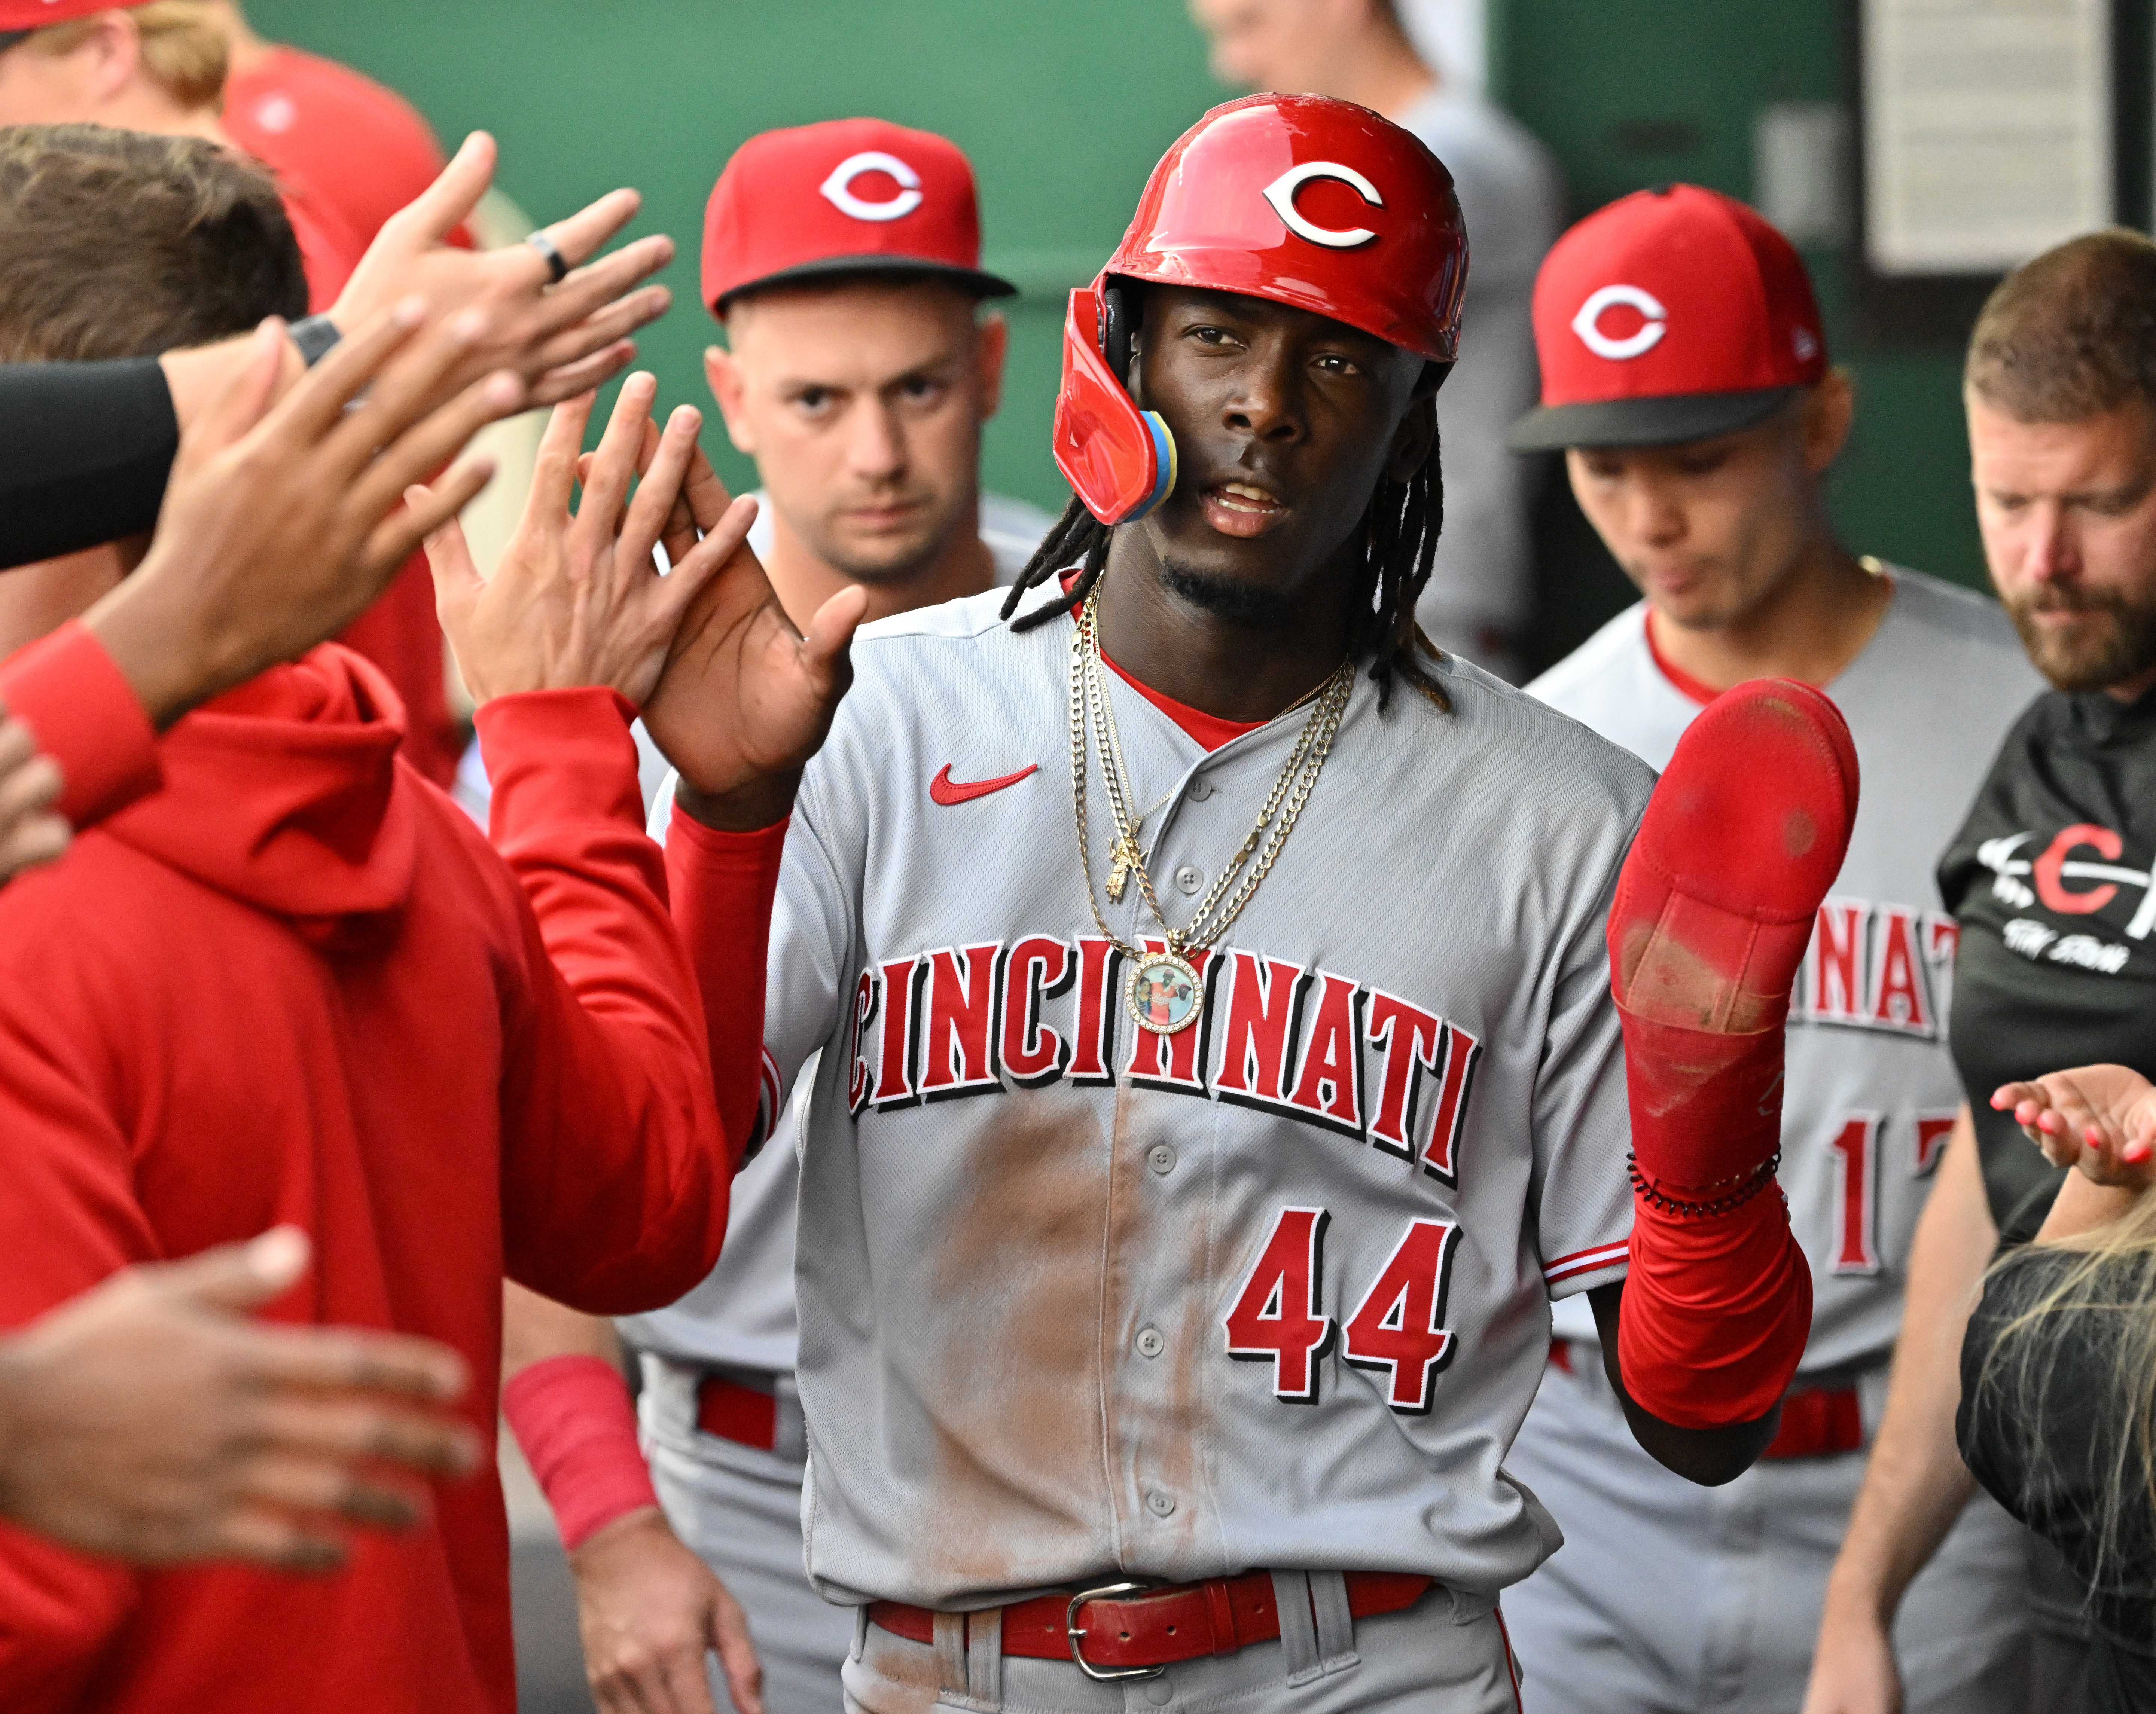 Big second inning leads Reds over reeling Royals